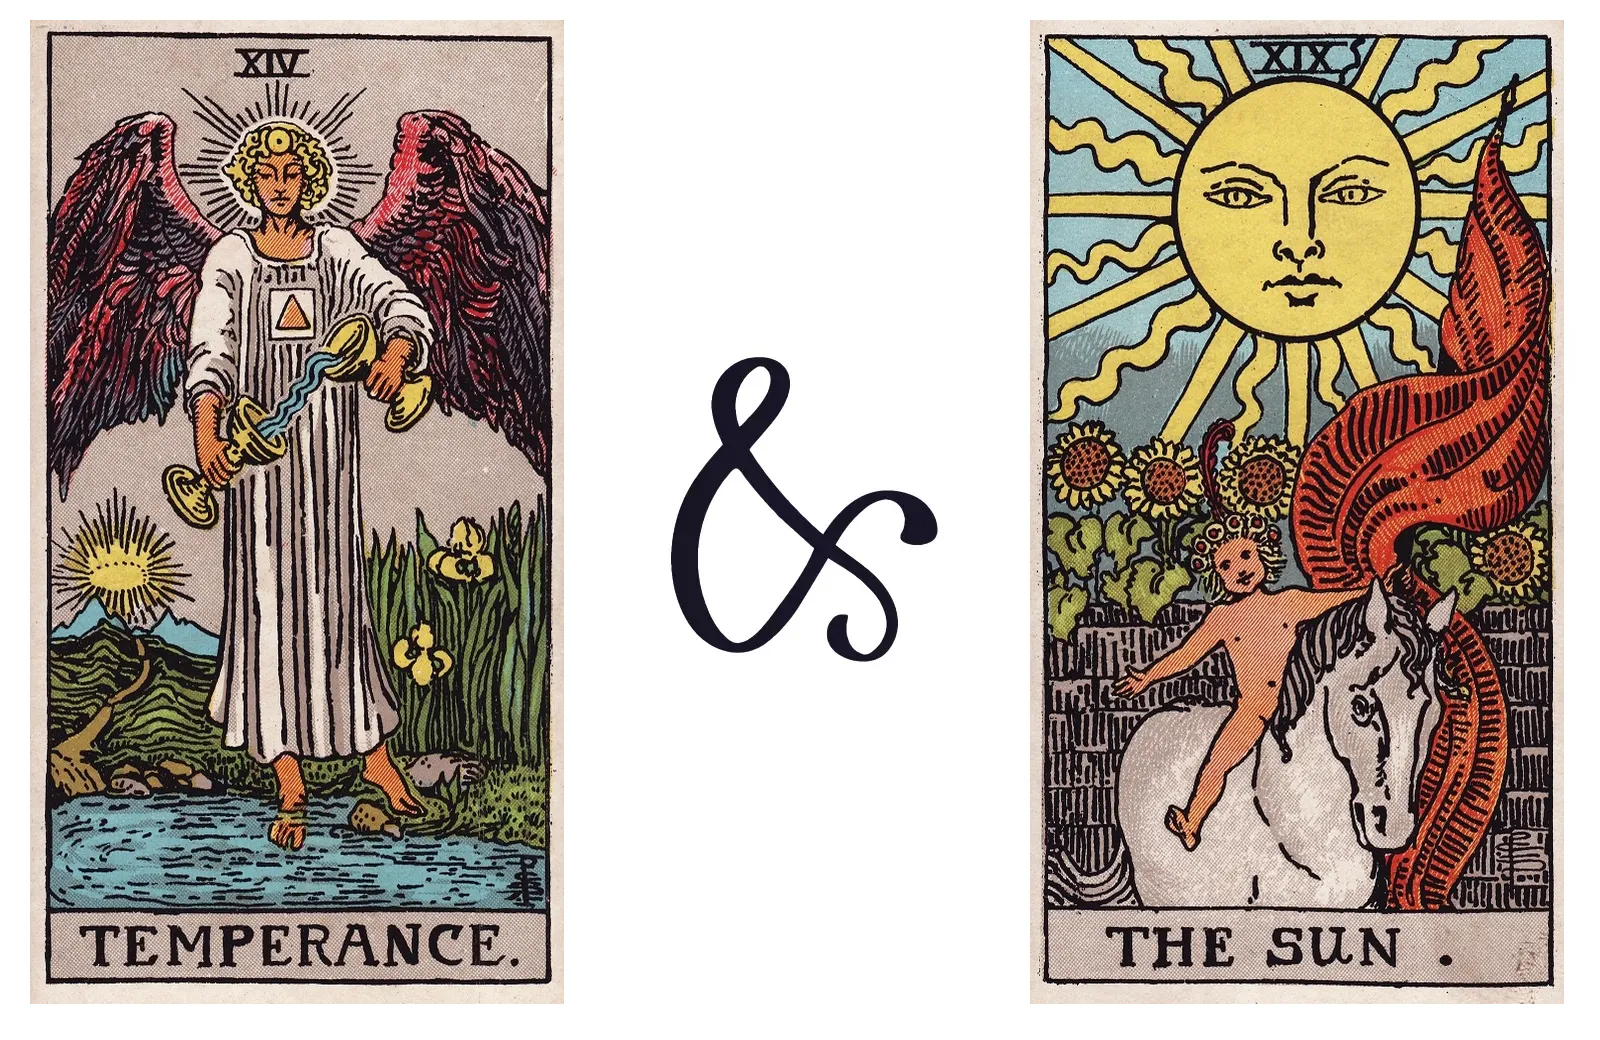 Temperance and The Sun